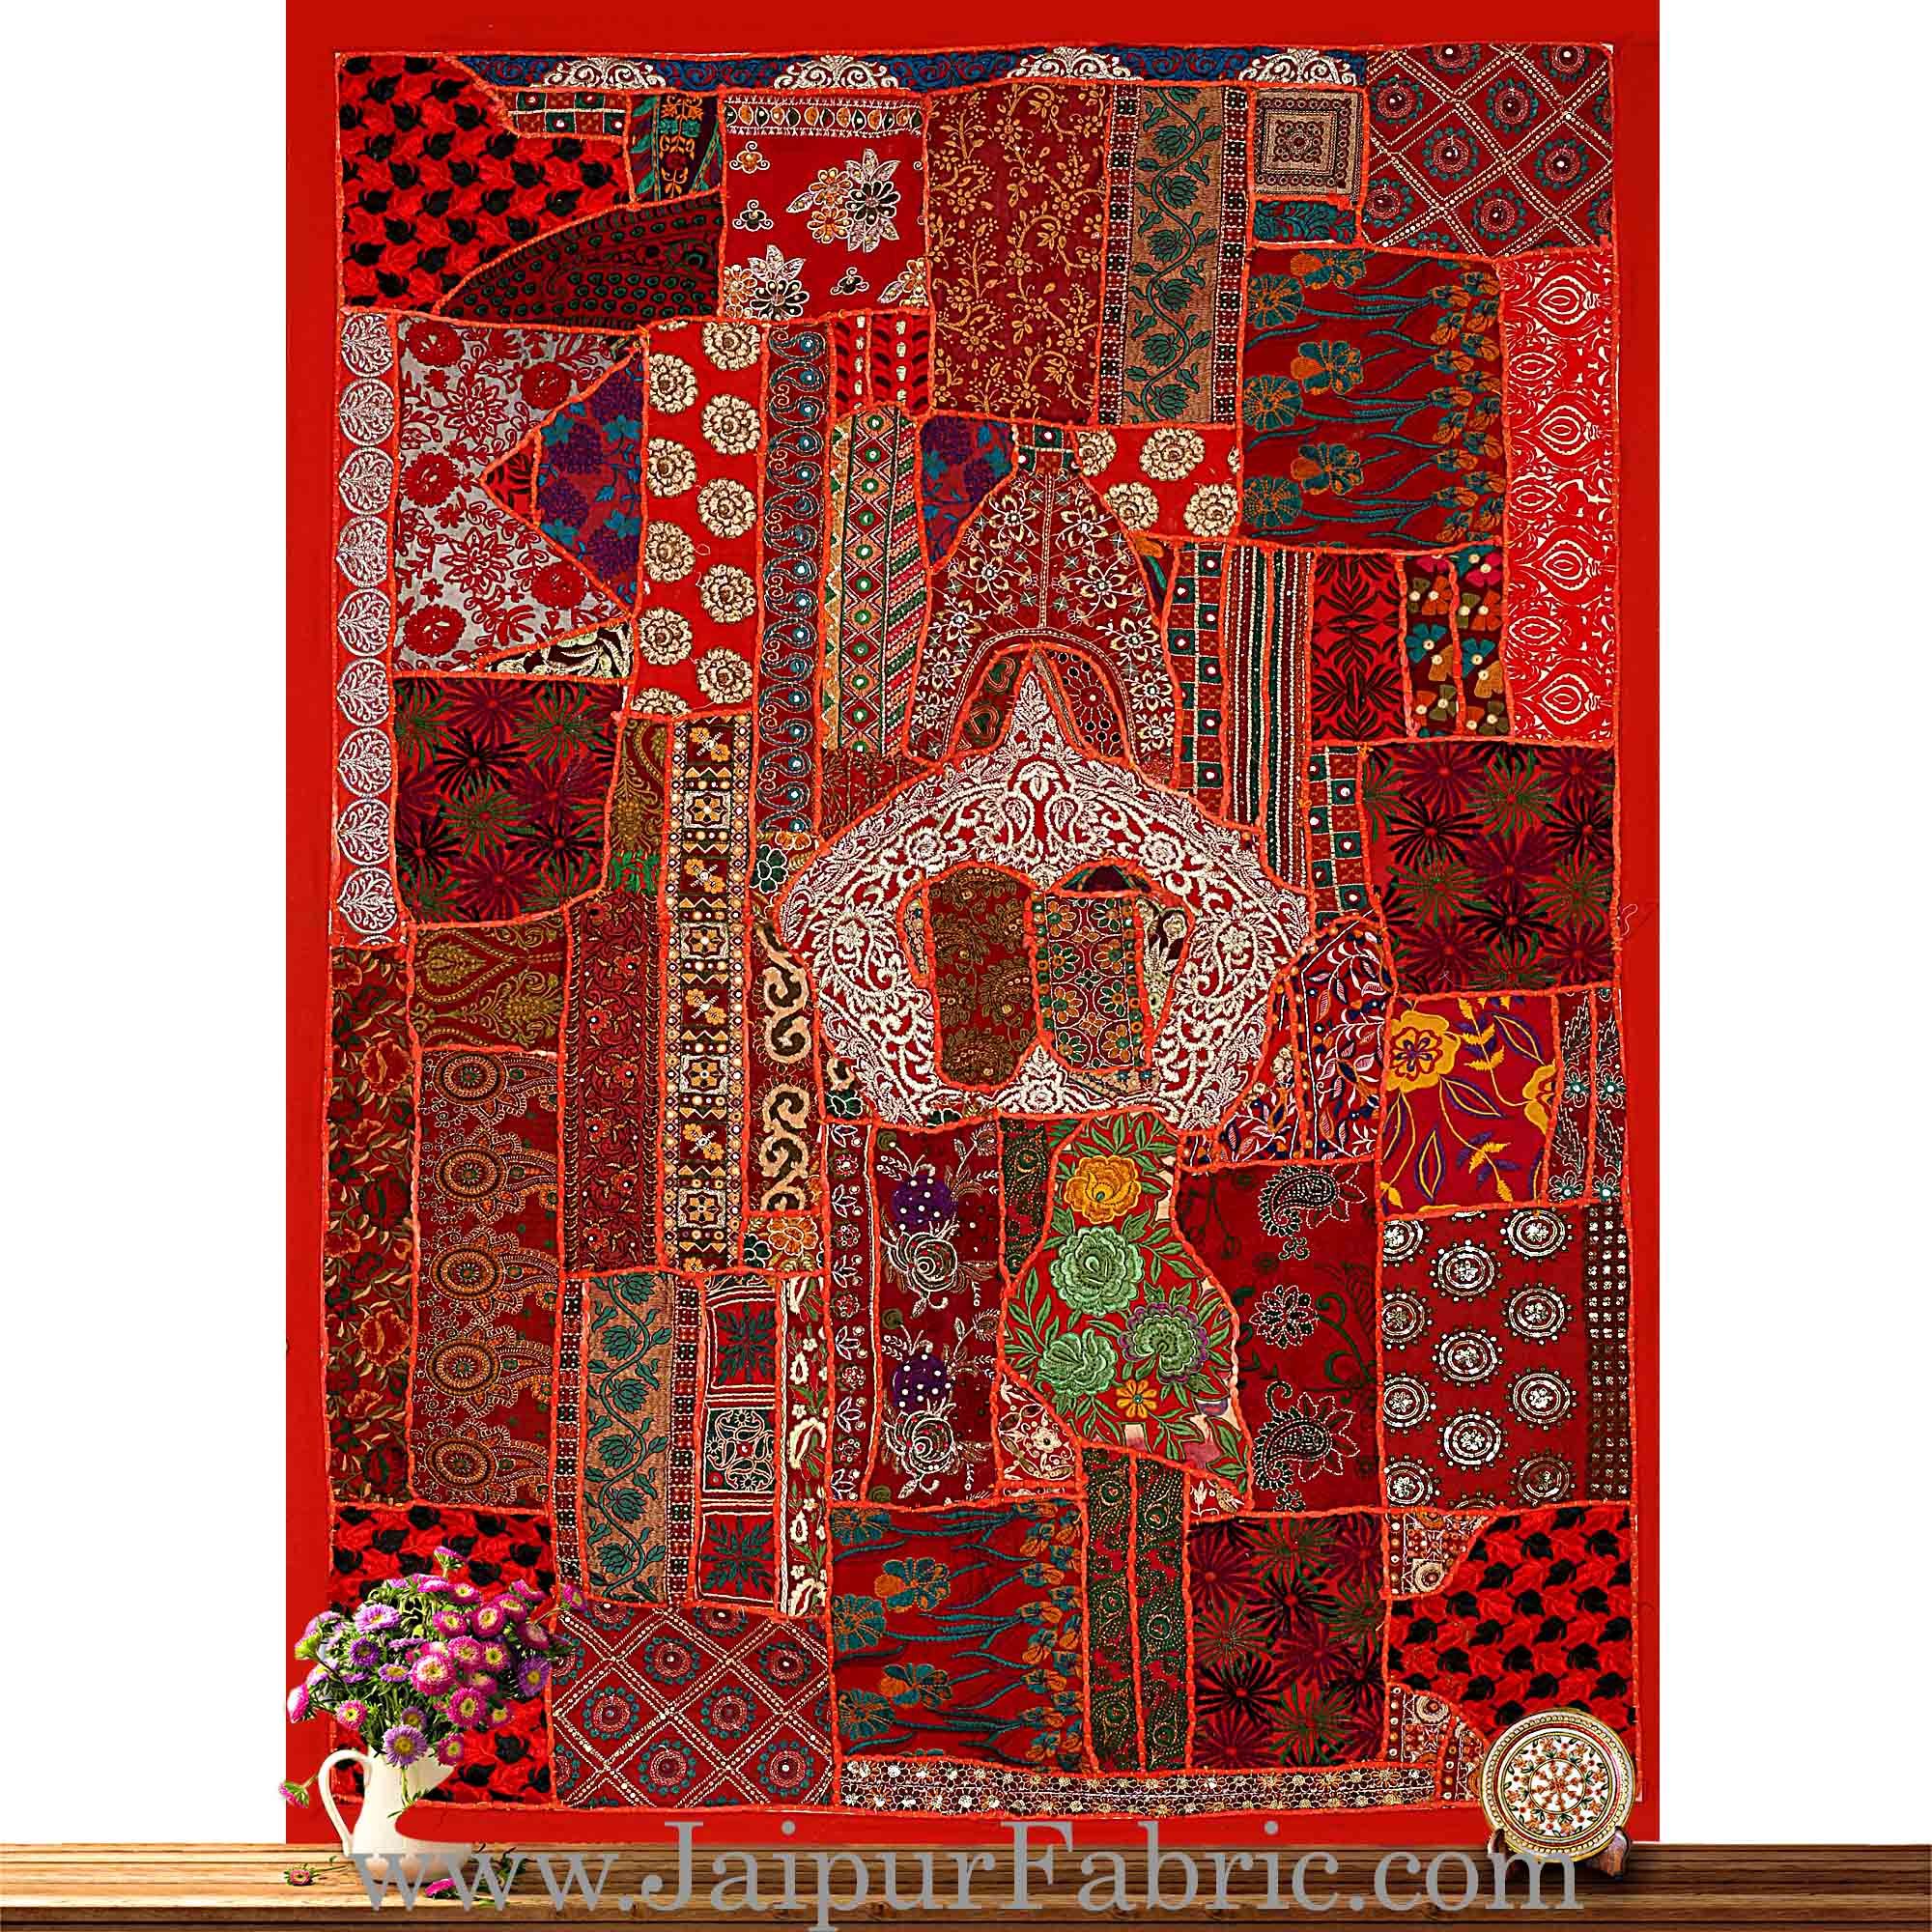 Wall hanging embroidered patchwork with applique work Multi Color